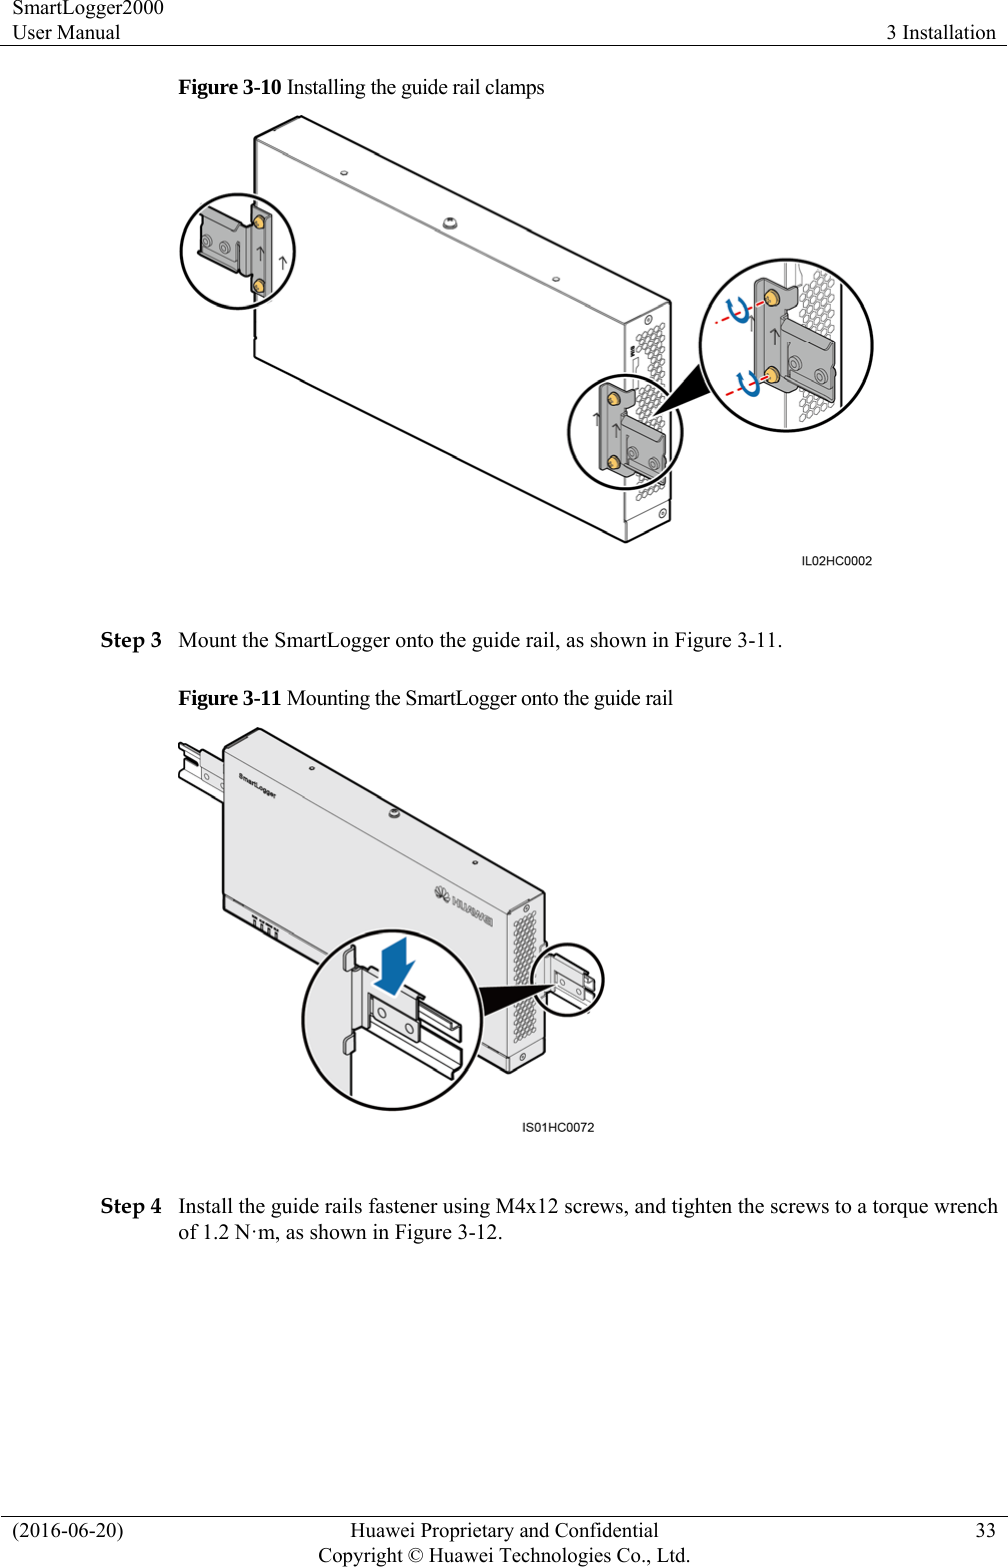 SmartLogger2000 User Manual  3 Installation (2016-06-20)  Huawei Proprietary and Confidential         Copyright © Huawei Technologies Co., Ltd.33 Figure 3-10 Installing the guide rail clamps   Step 3 Mount the SmartLogger onto the guide rail, as shown in Figure 3-11. Figure 3-11 Mounting the SmartLogger onto the guide rail   Step 4 Install the guide rails fastener using M4x12 screws, and tighten the screws to a torque wrench of 1.2 N·m, as shown in Figure 3-12. 